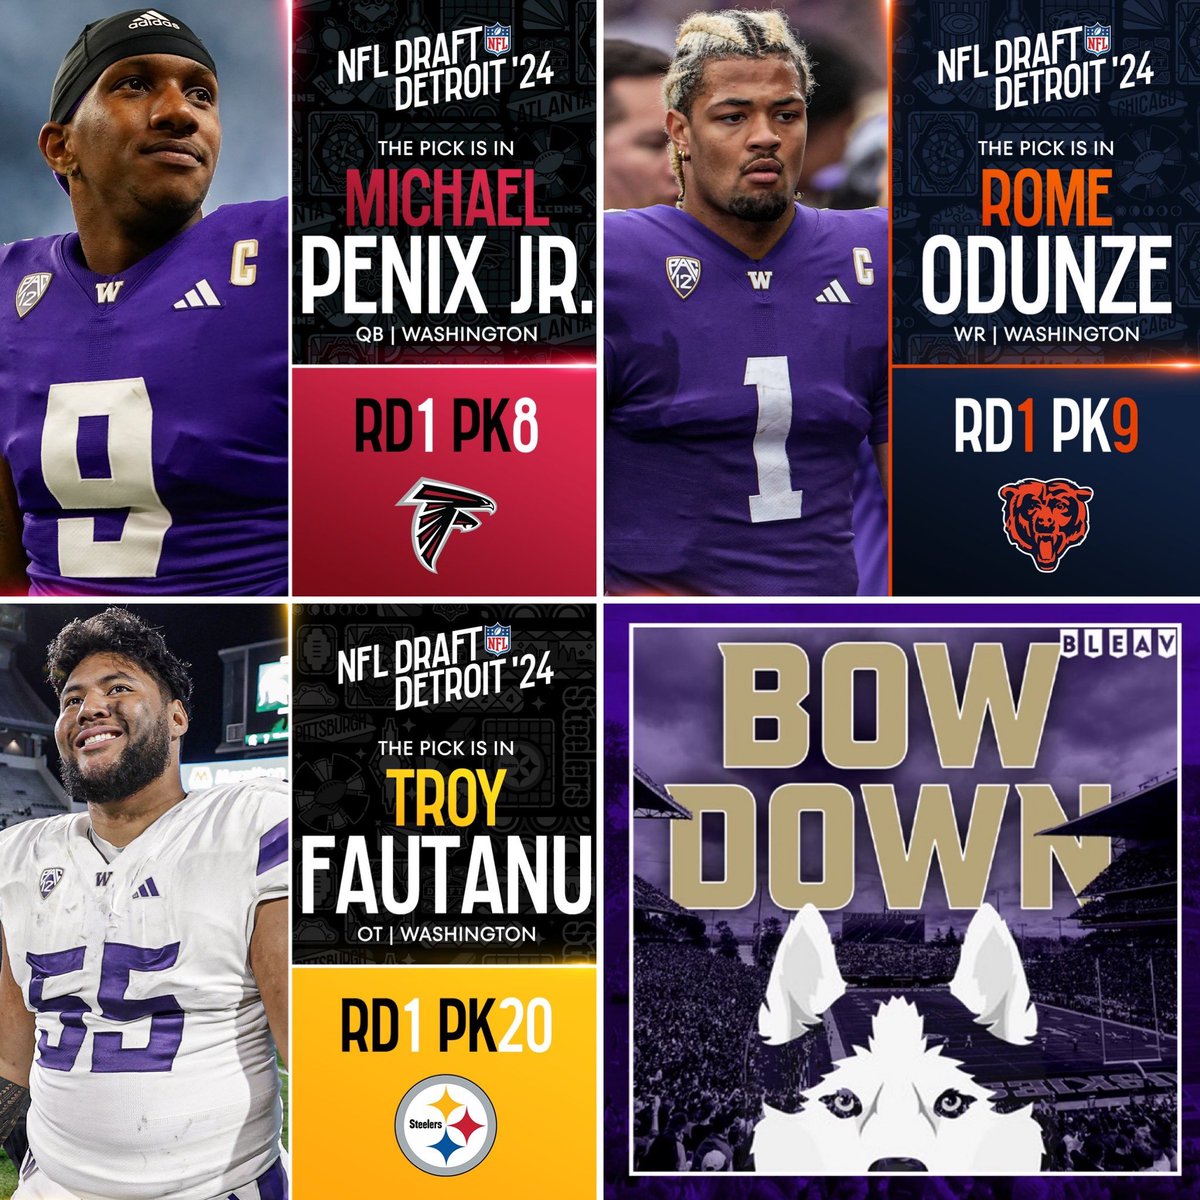 What a day. What a night. What a time to be a Husky! #BeAPro #TheBowDownPodcast #BowDown @BleavNetwork @UW_Football